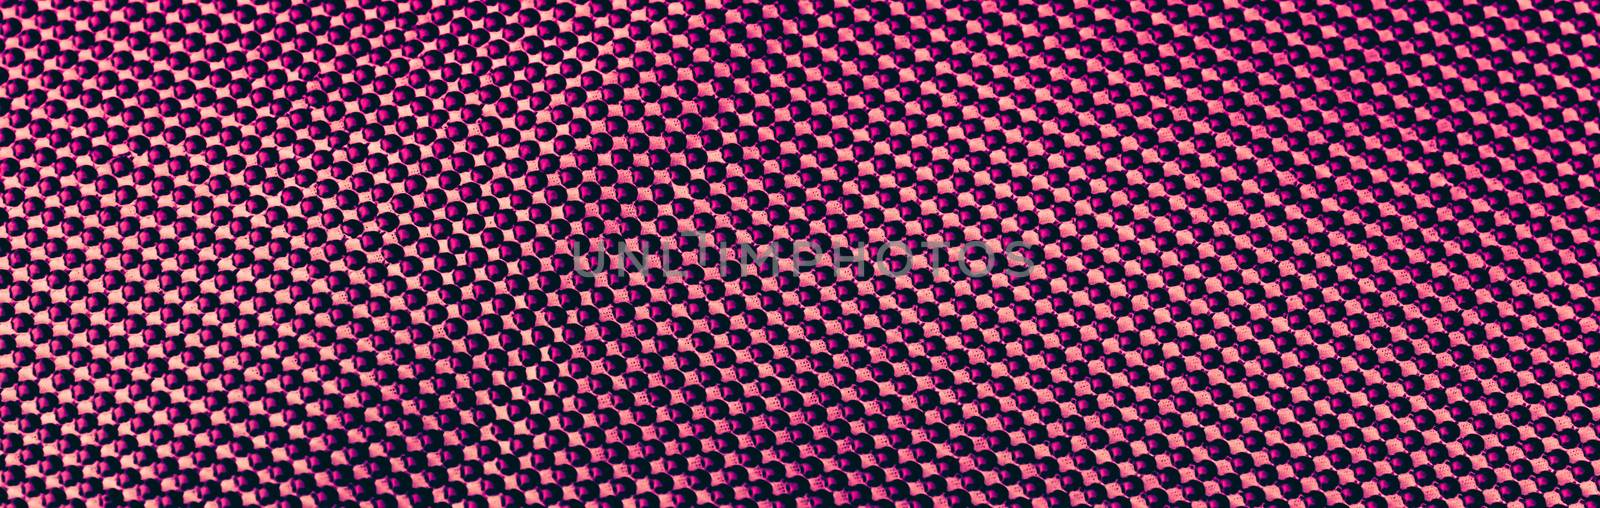 Pink metallic abstract background, futuristic surface and high t by Anneleven